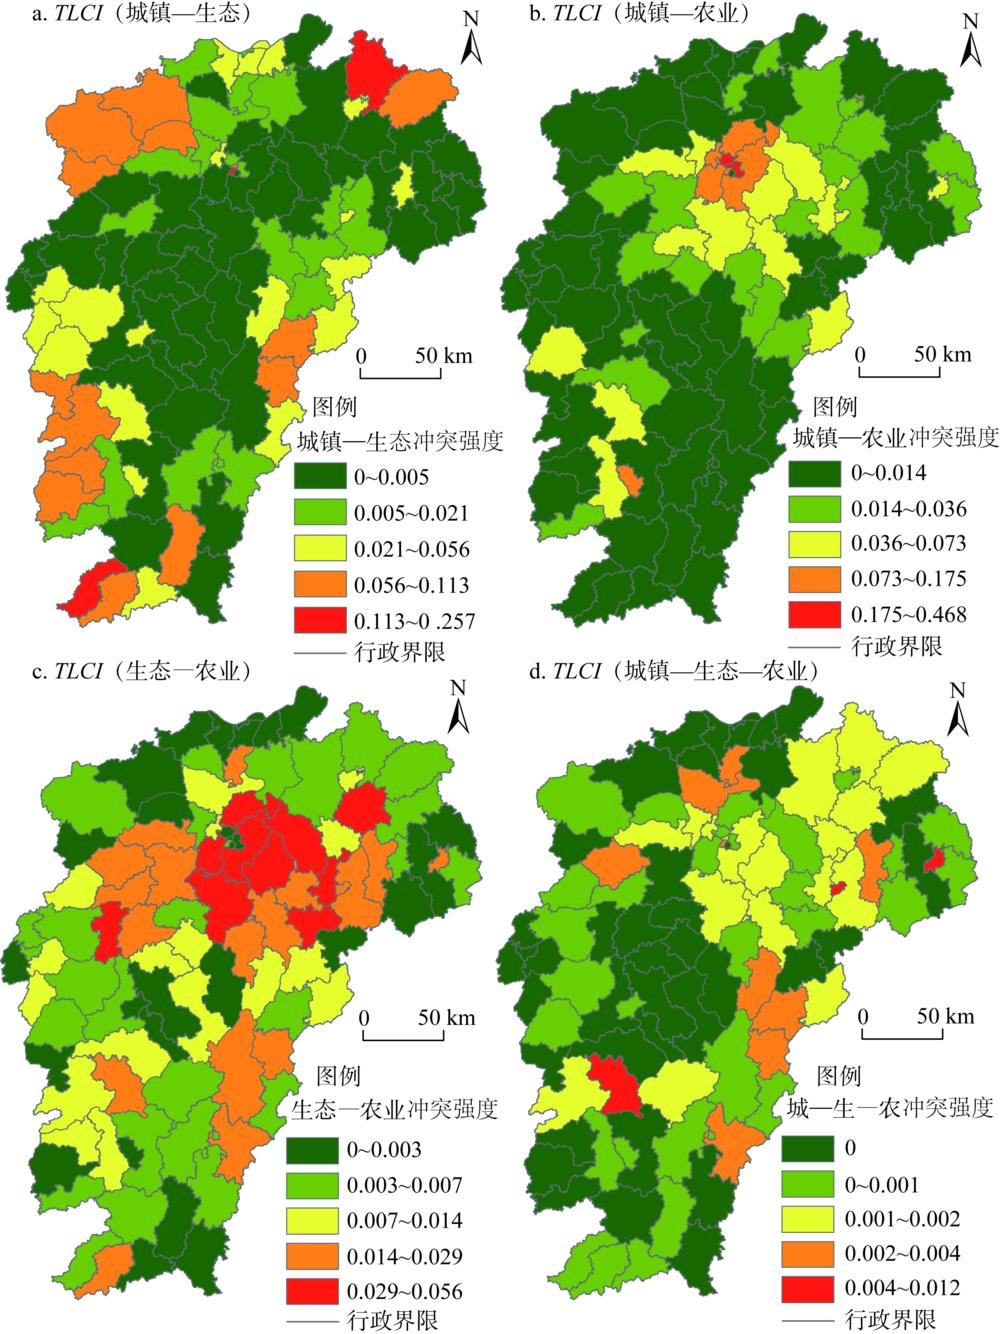 Distribution of "three lines" conflict index of Jiangxi province